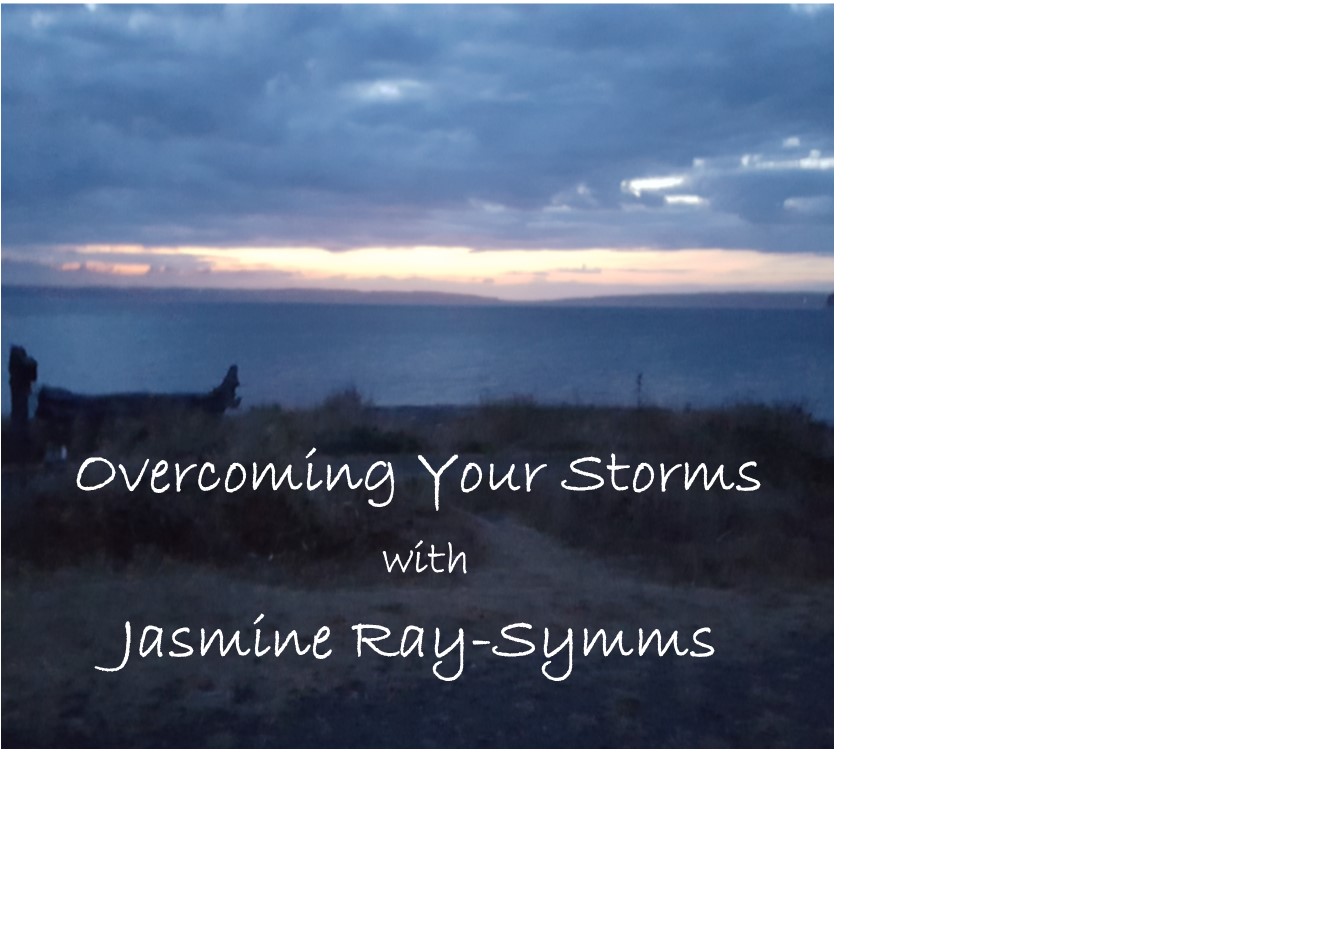 Overcoming Your Storms with Jasmine Ray-Symms